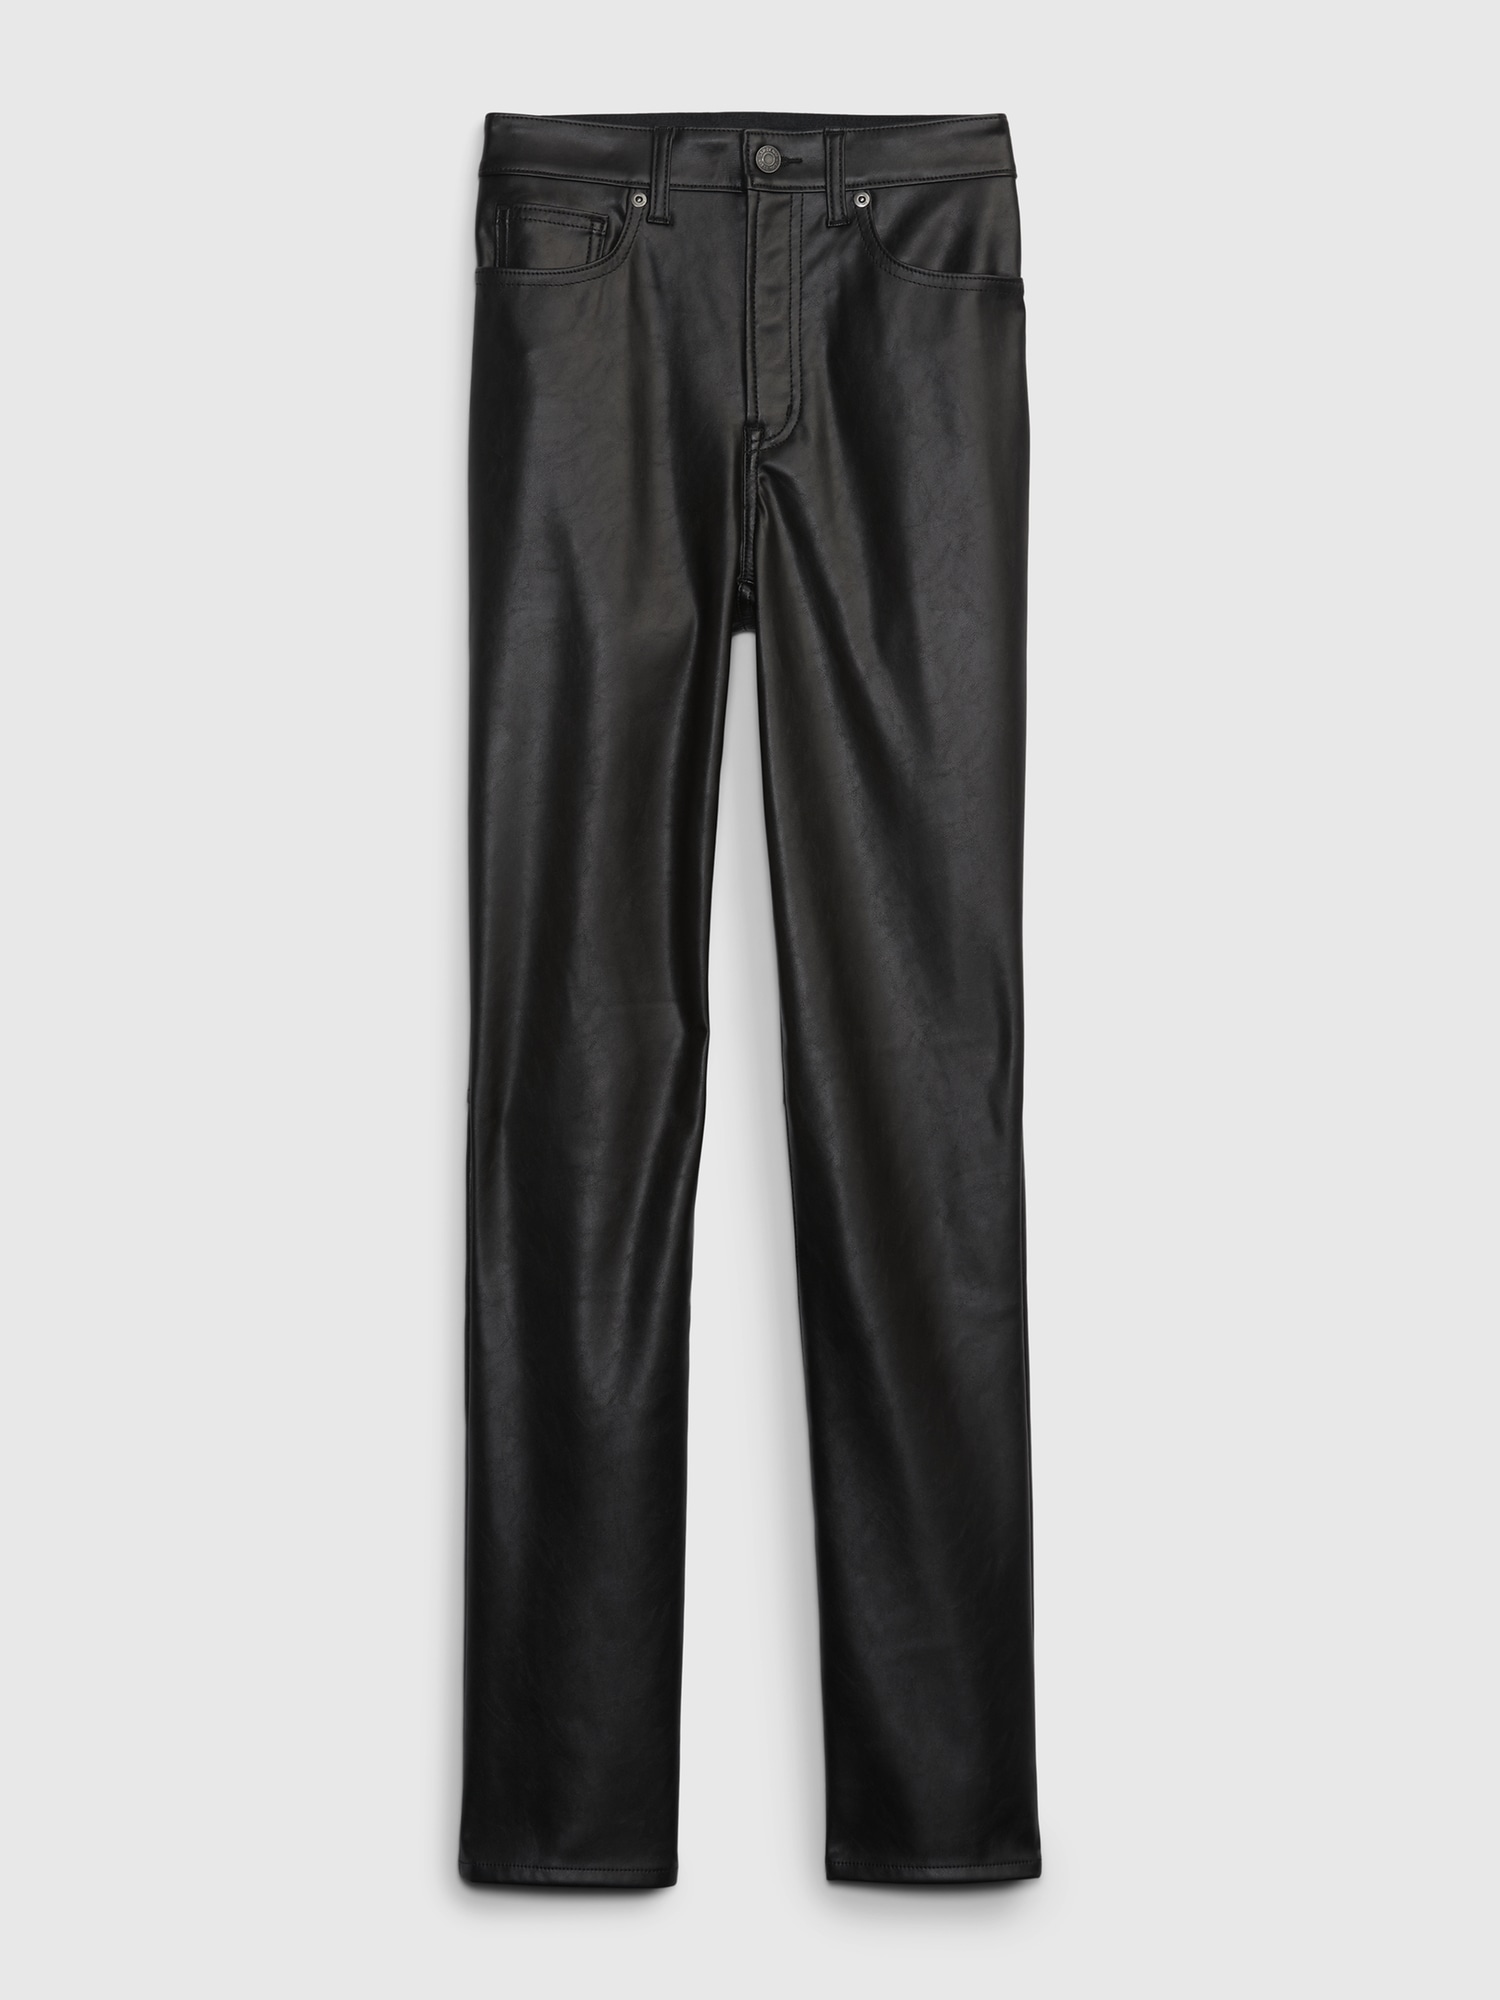 ONLY Skinny Leather Look Coated Trousers in Black